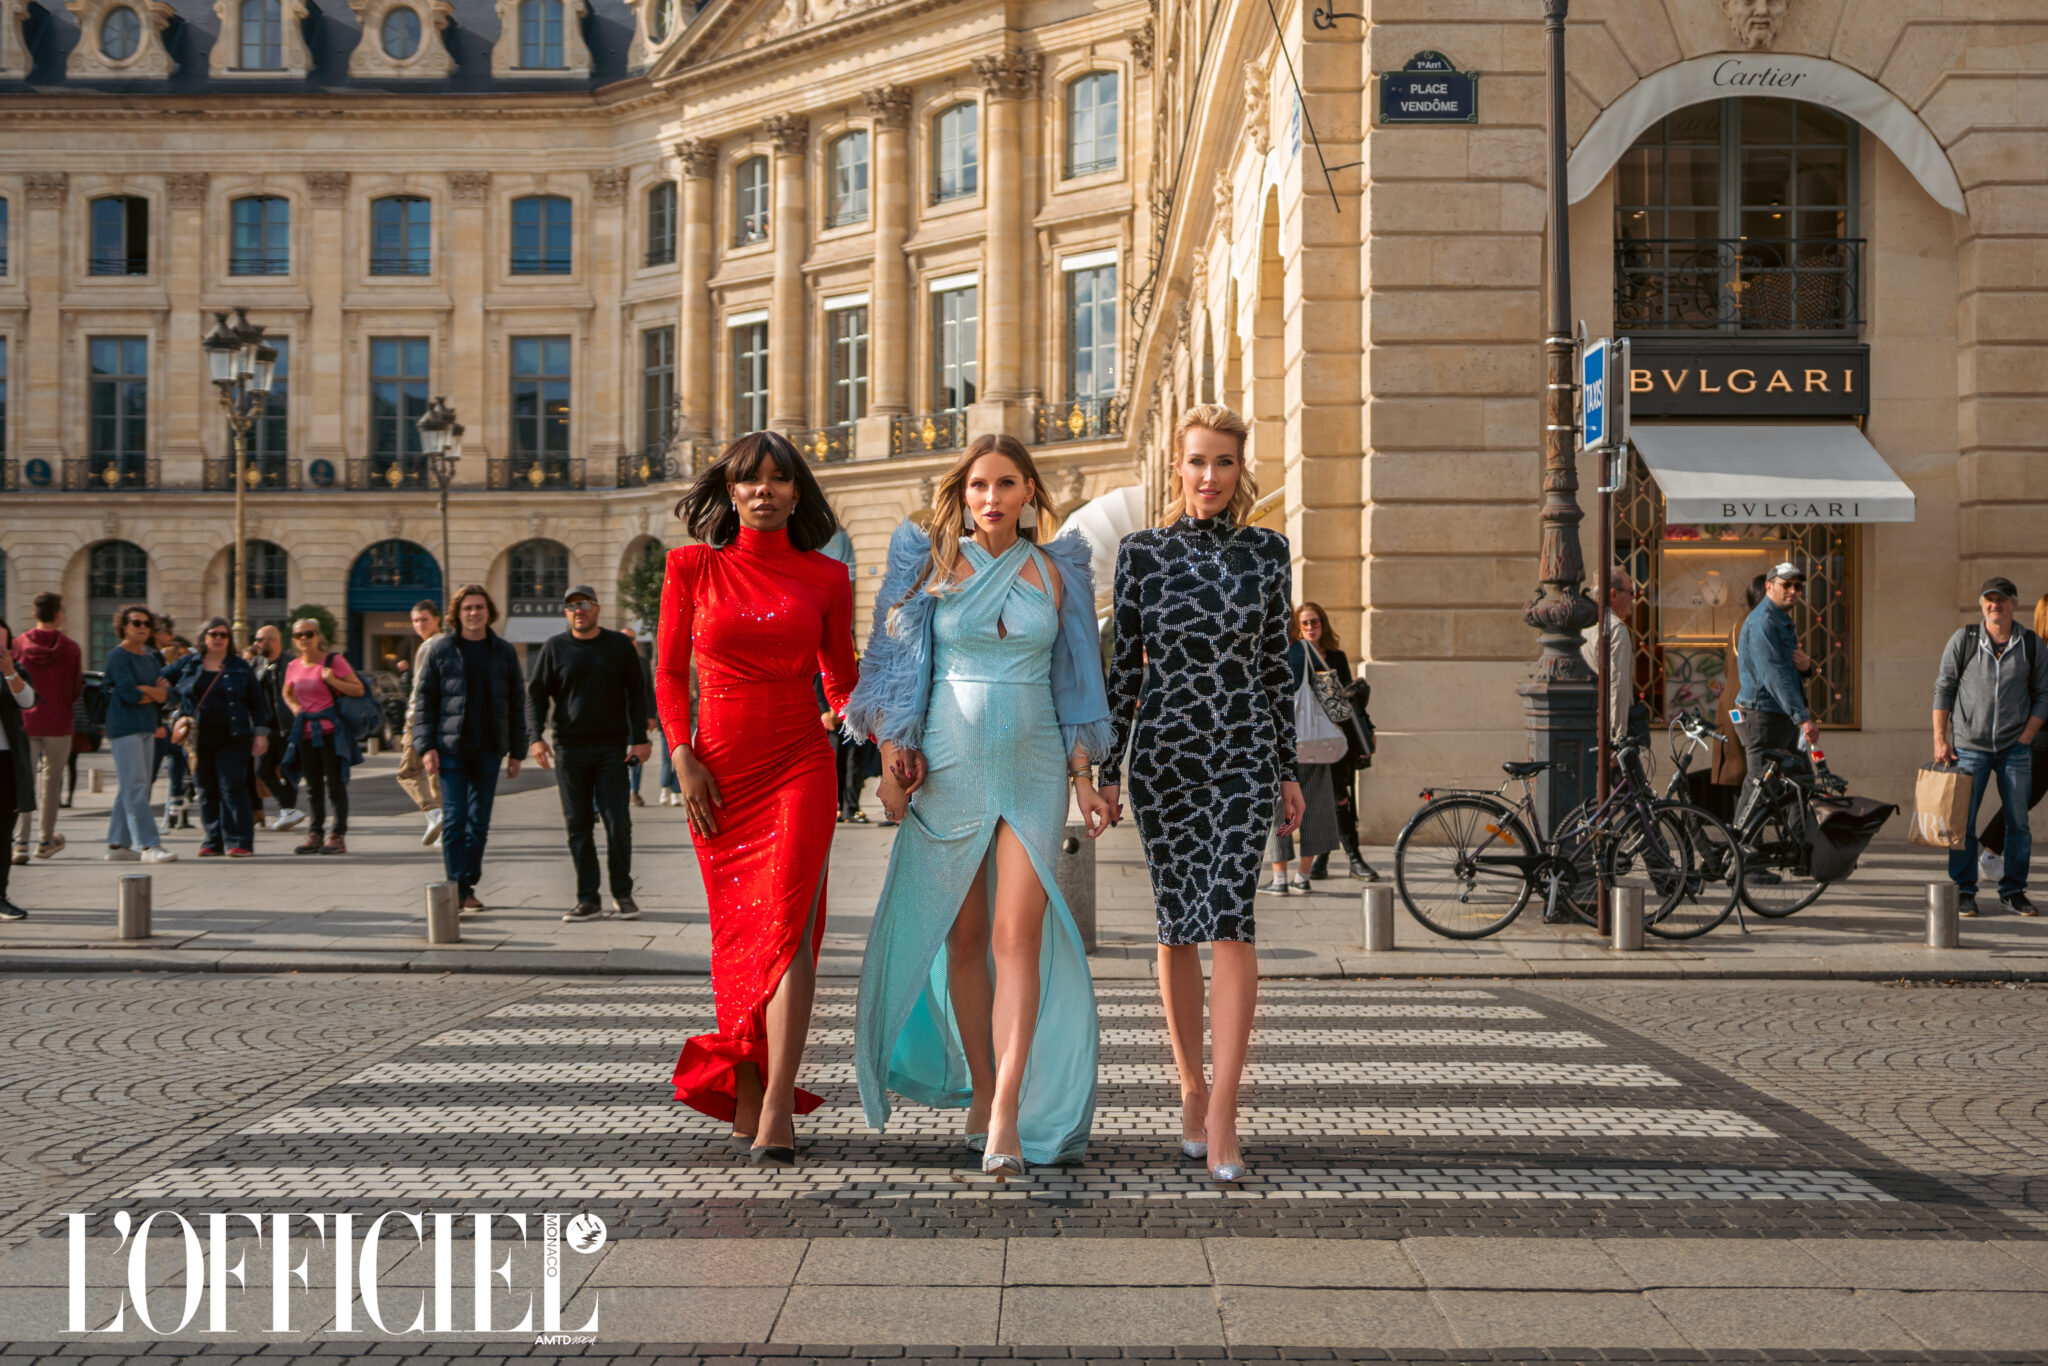 Feature at L'Officiel Monaco during Paris Fashion Week SS 23. Visual Fashion Story from the magical Paris. Featuring: Nicolas Besson, Gemy Maalouf, Charriol, Sol Angelann and more. 15